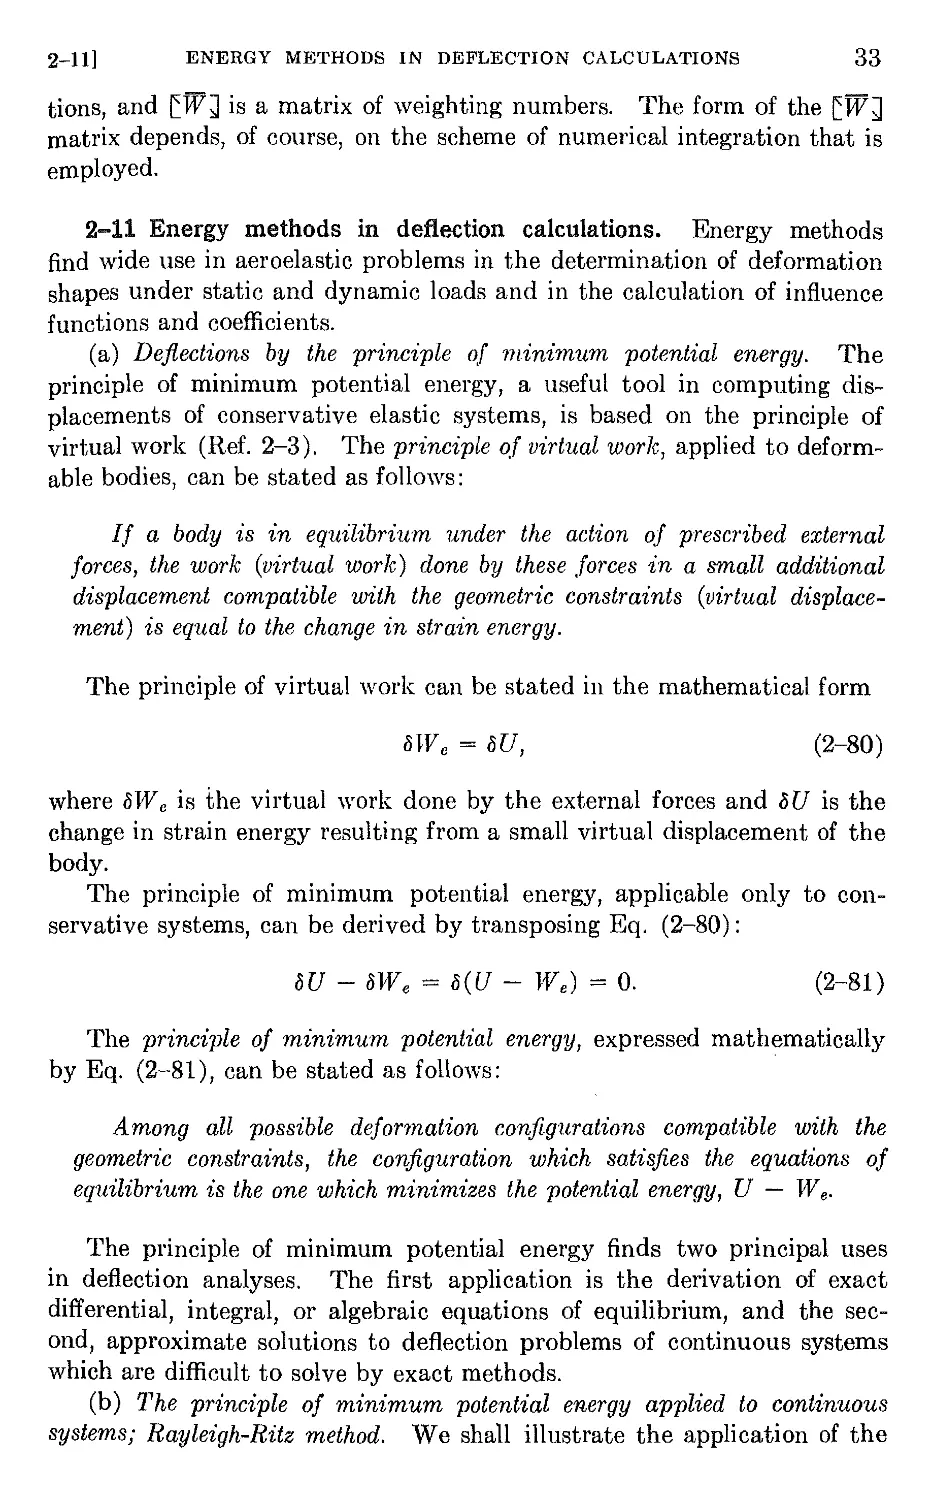 2.11 Energy methods in deflection calculations